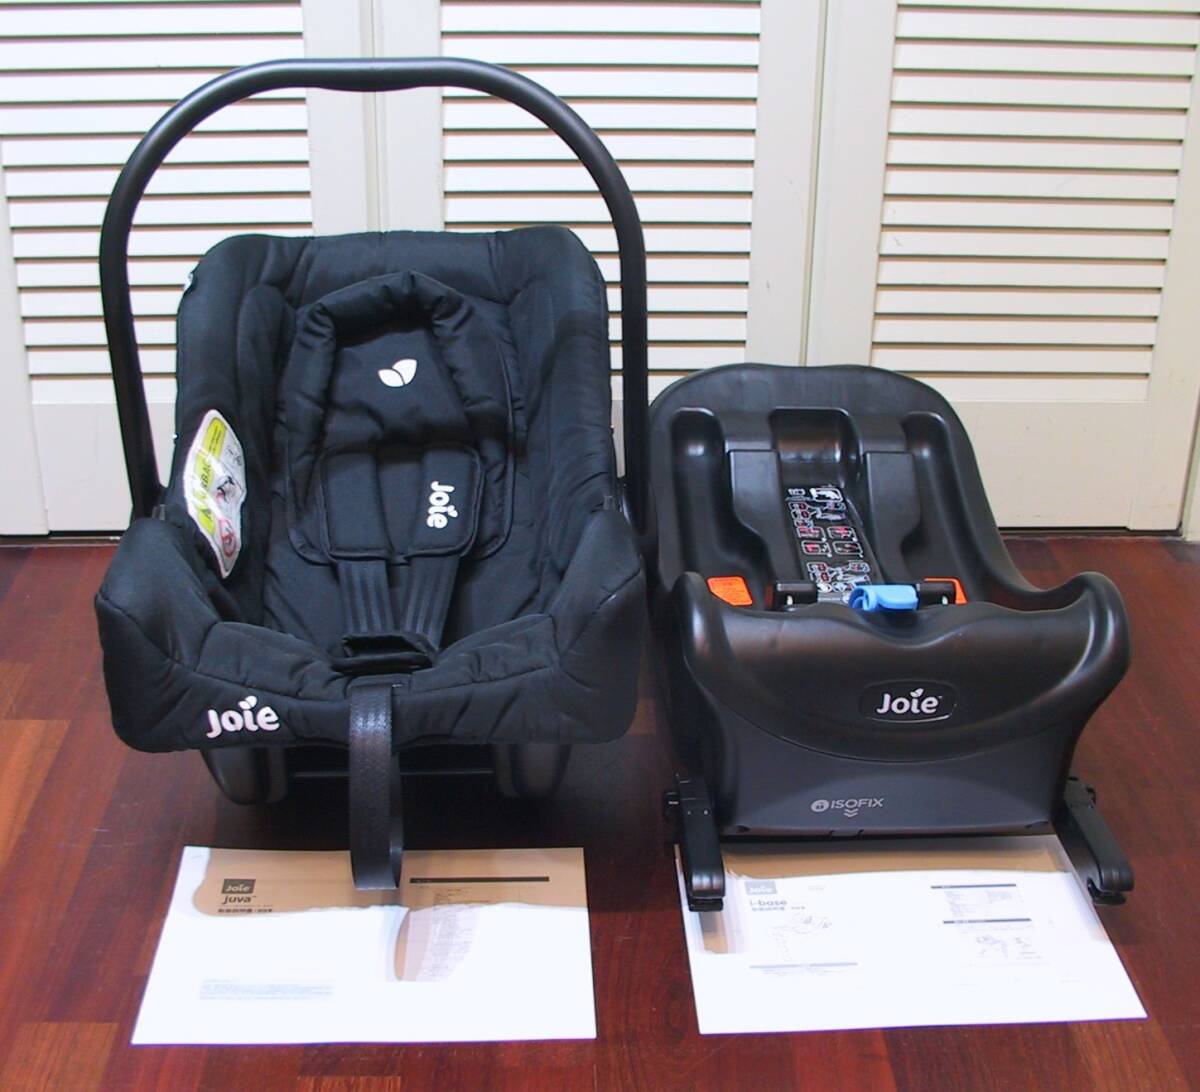 Joie Joy -Juvajuba+i-Base I base ISOFIX correspondence child seat & in fan to car seat to bell system correspondence cleaning settled beautiful goods 